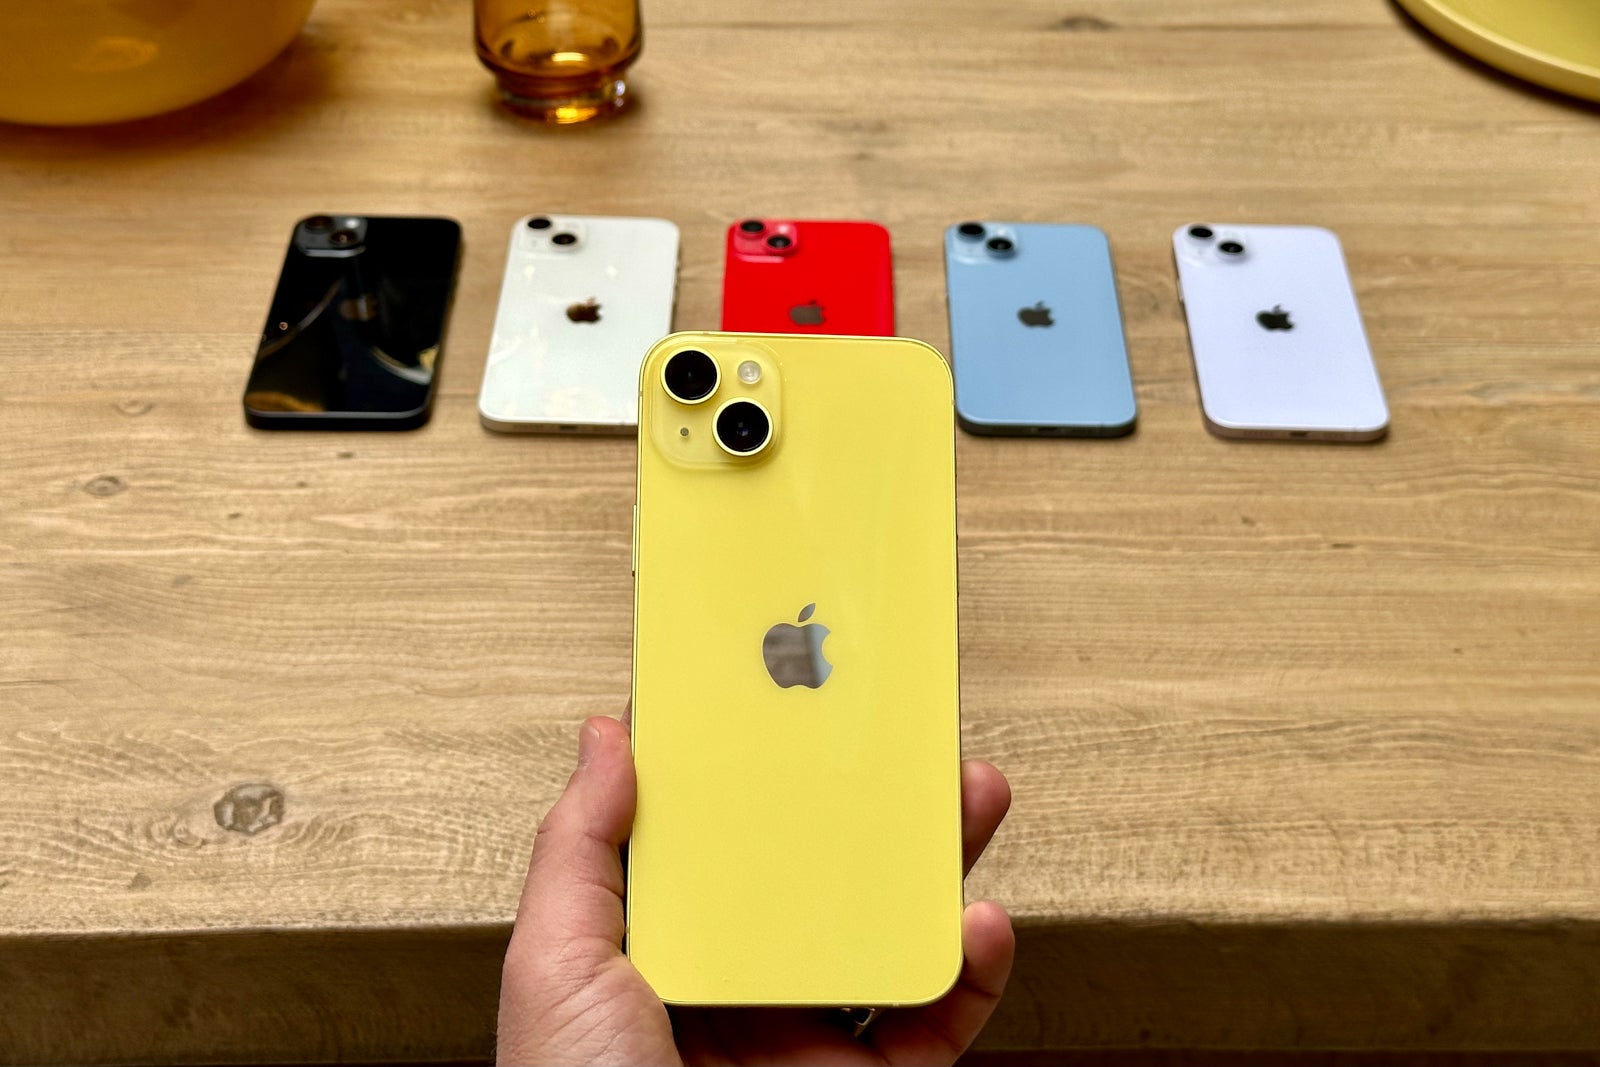 1st look: Hands-on with the new yellow iPhone 14, 14 Plus - The